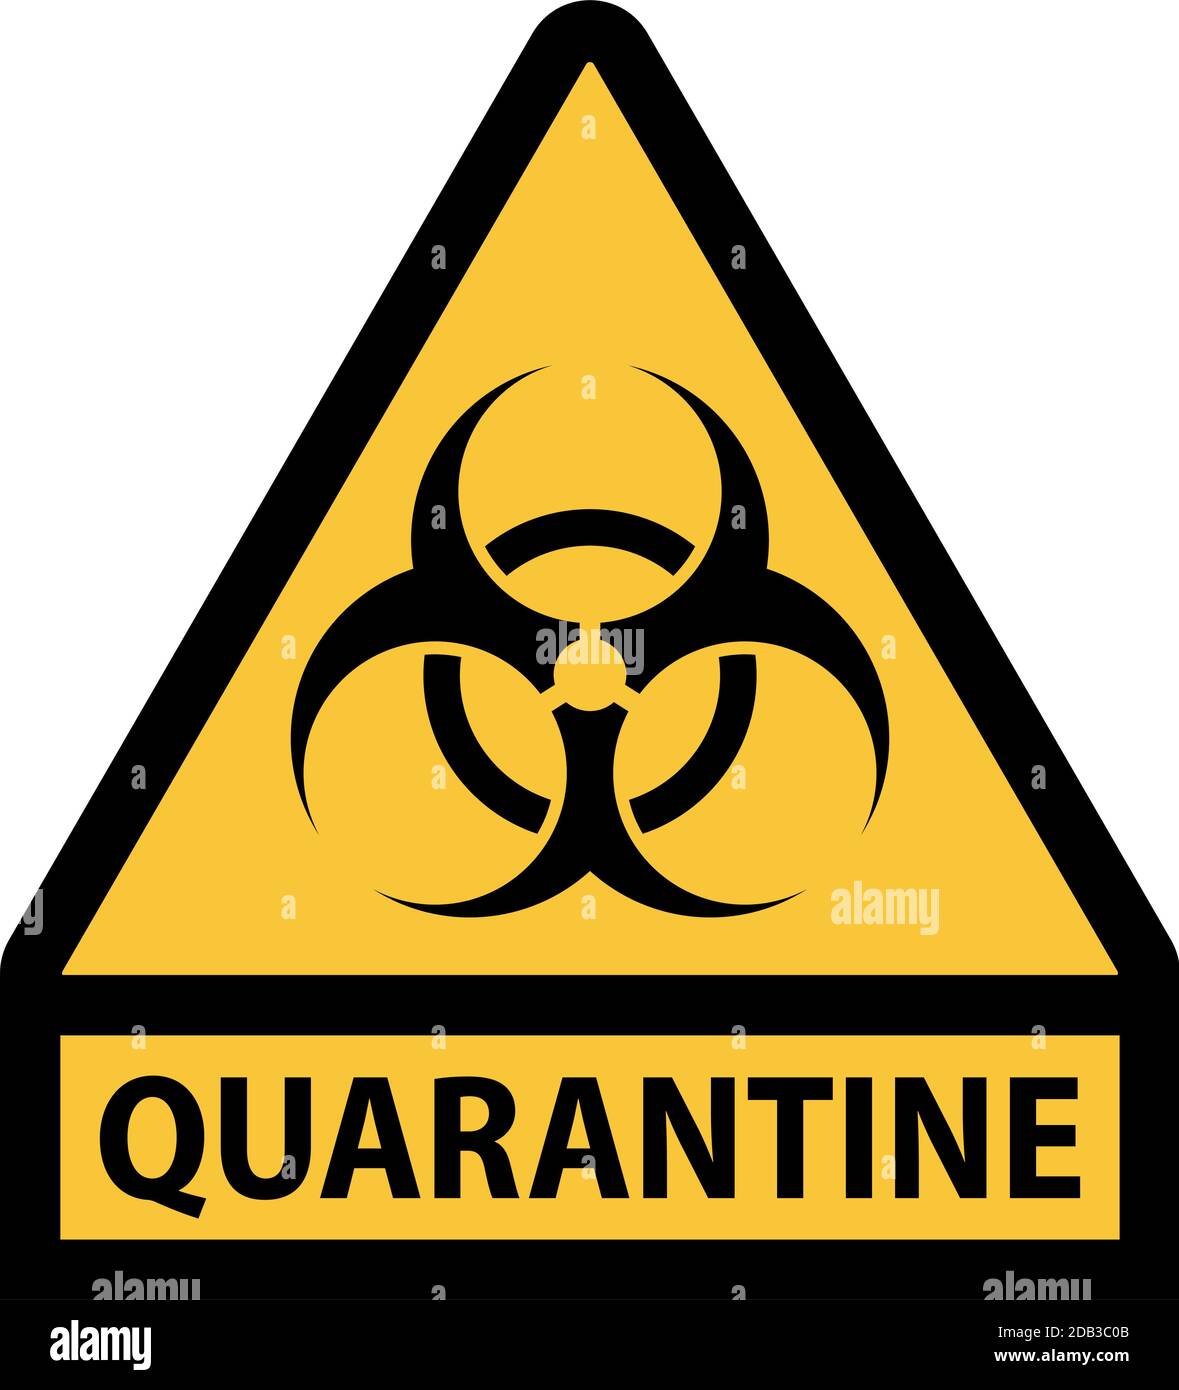 Quarantine biohazard warning sign with triangular shape yellow color and black frame Stock Vector